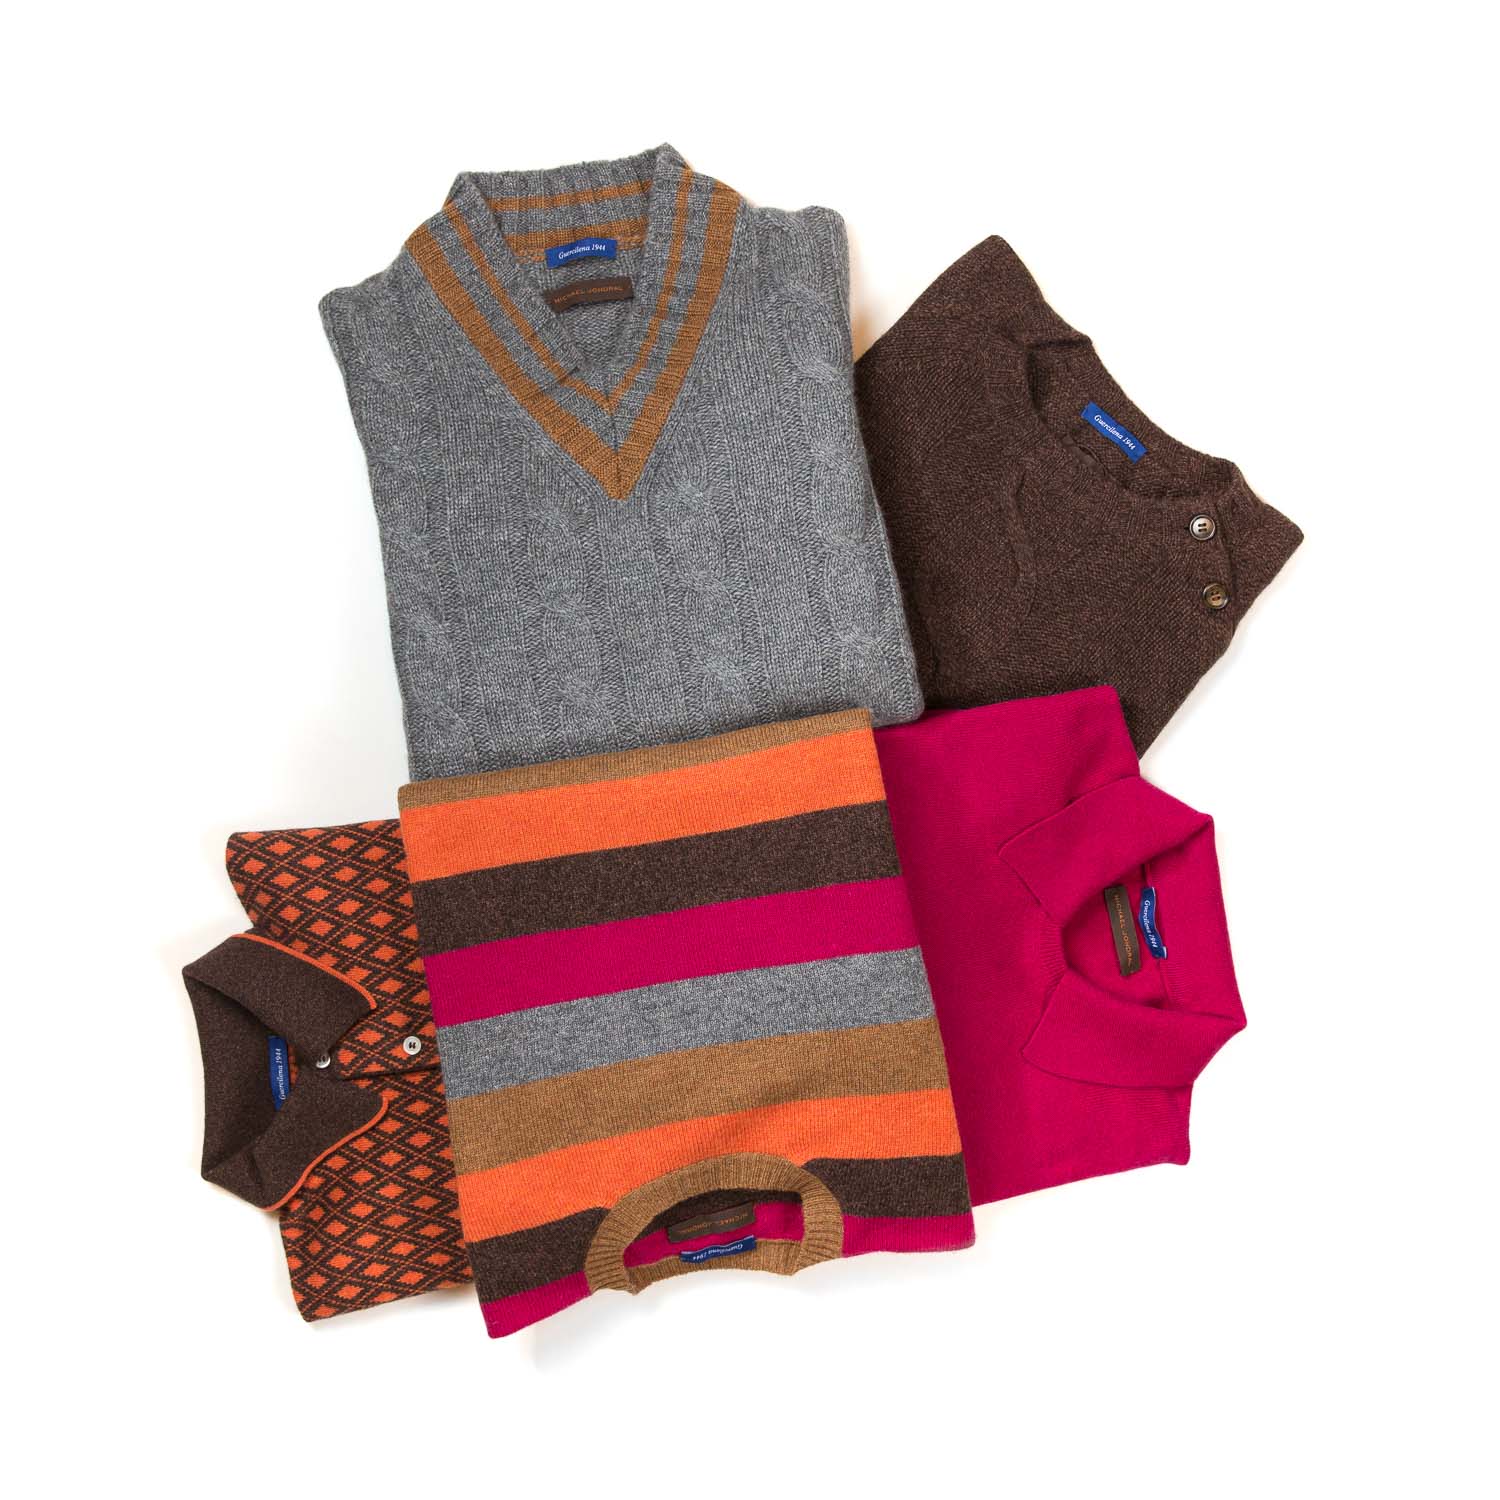 Colorful Knitwear Selection